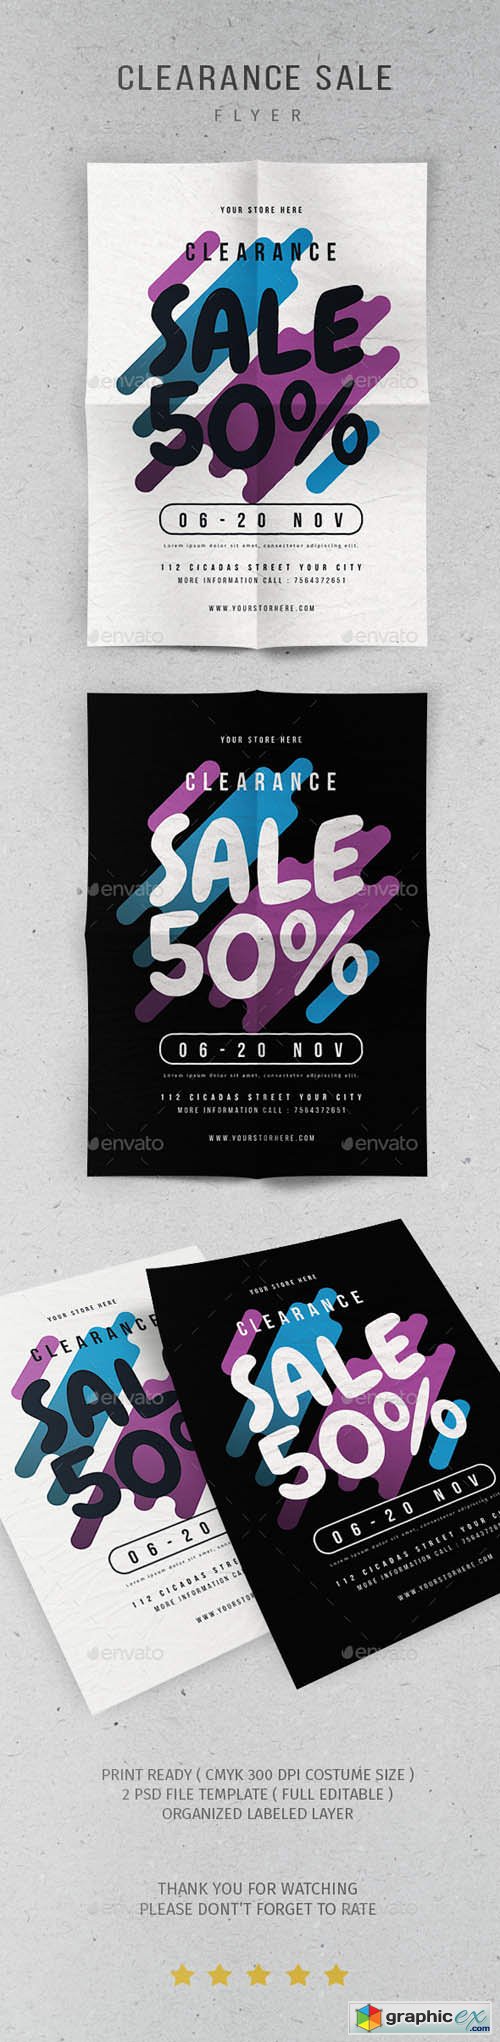 Clearance Sale Flyer